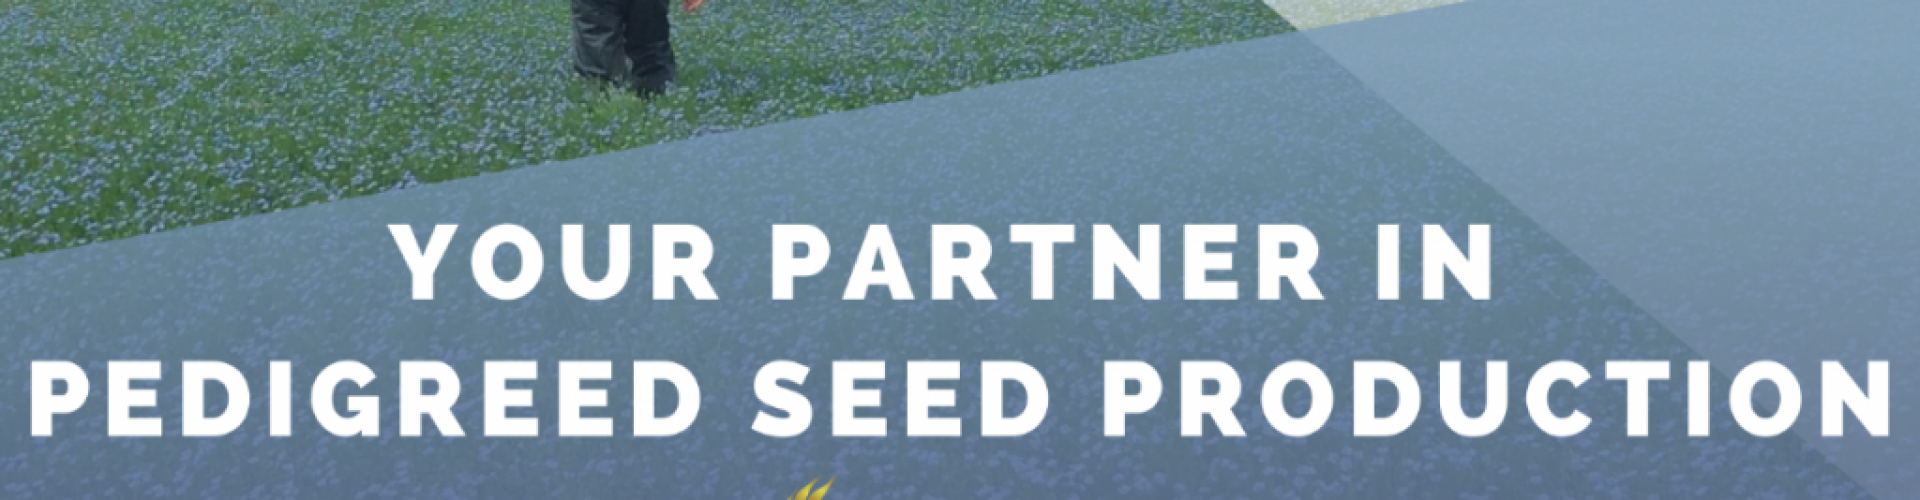 Your partner in pedigreed seed